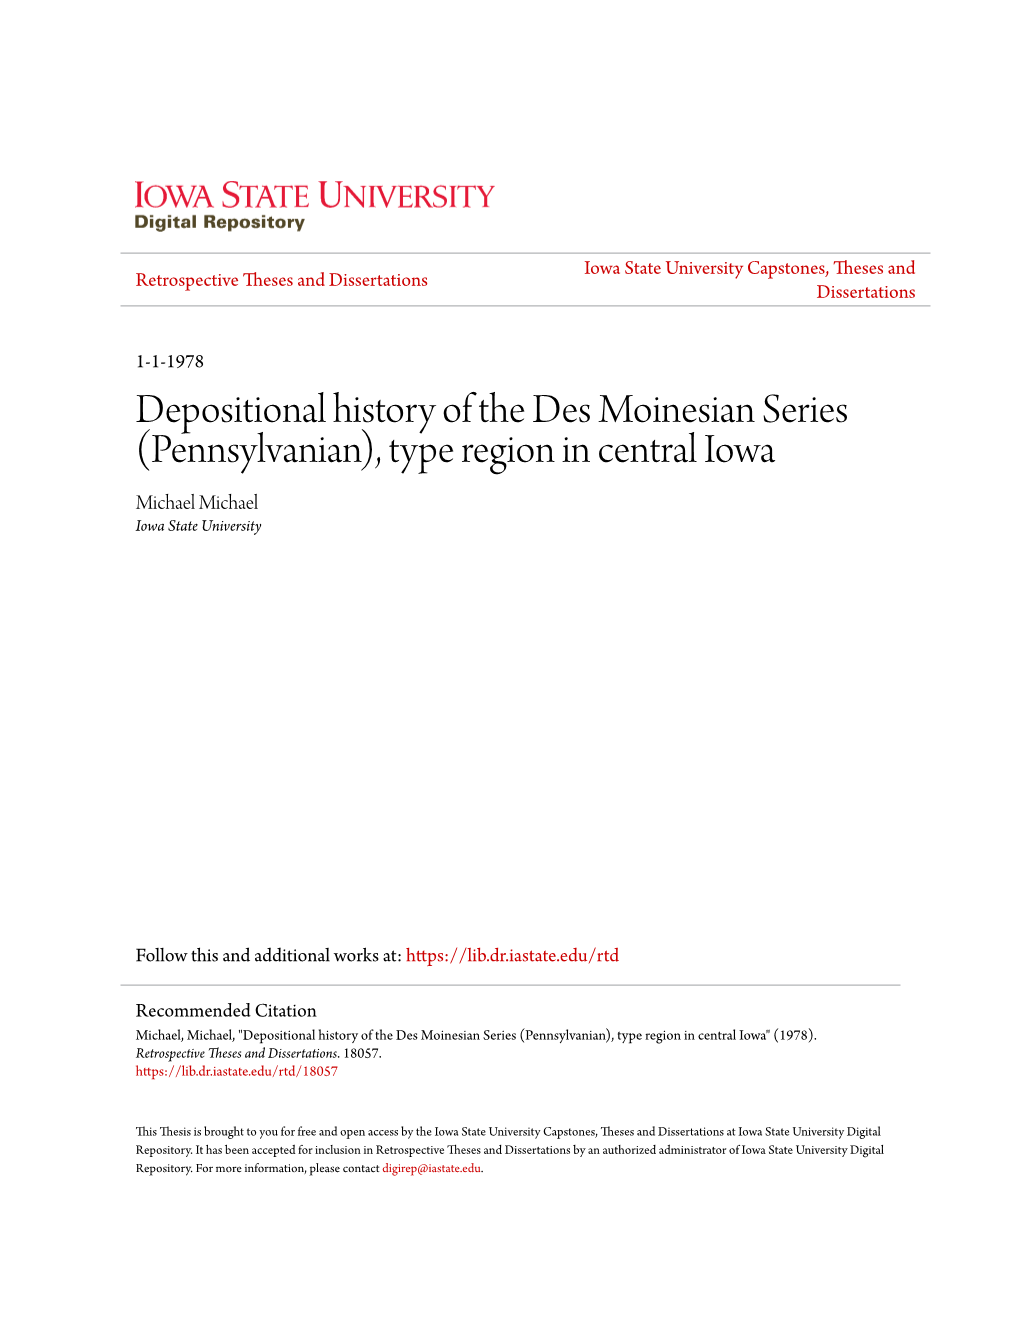 Depositional History of the Des Moinesian Series (Pennsylvanian), Type Region in Central Iowa Michael Michael Iowa State University